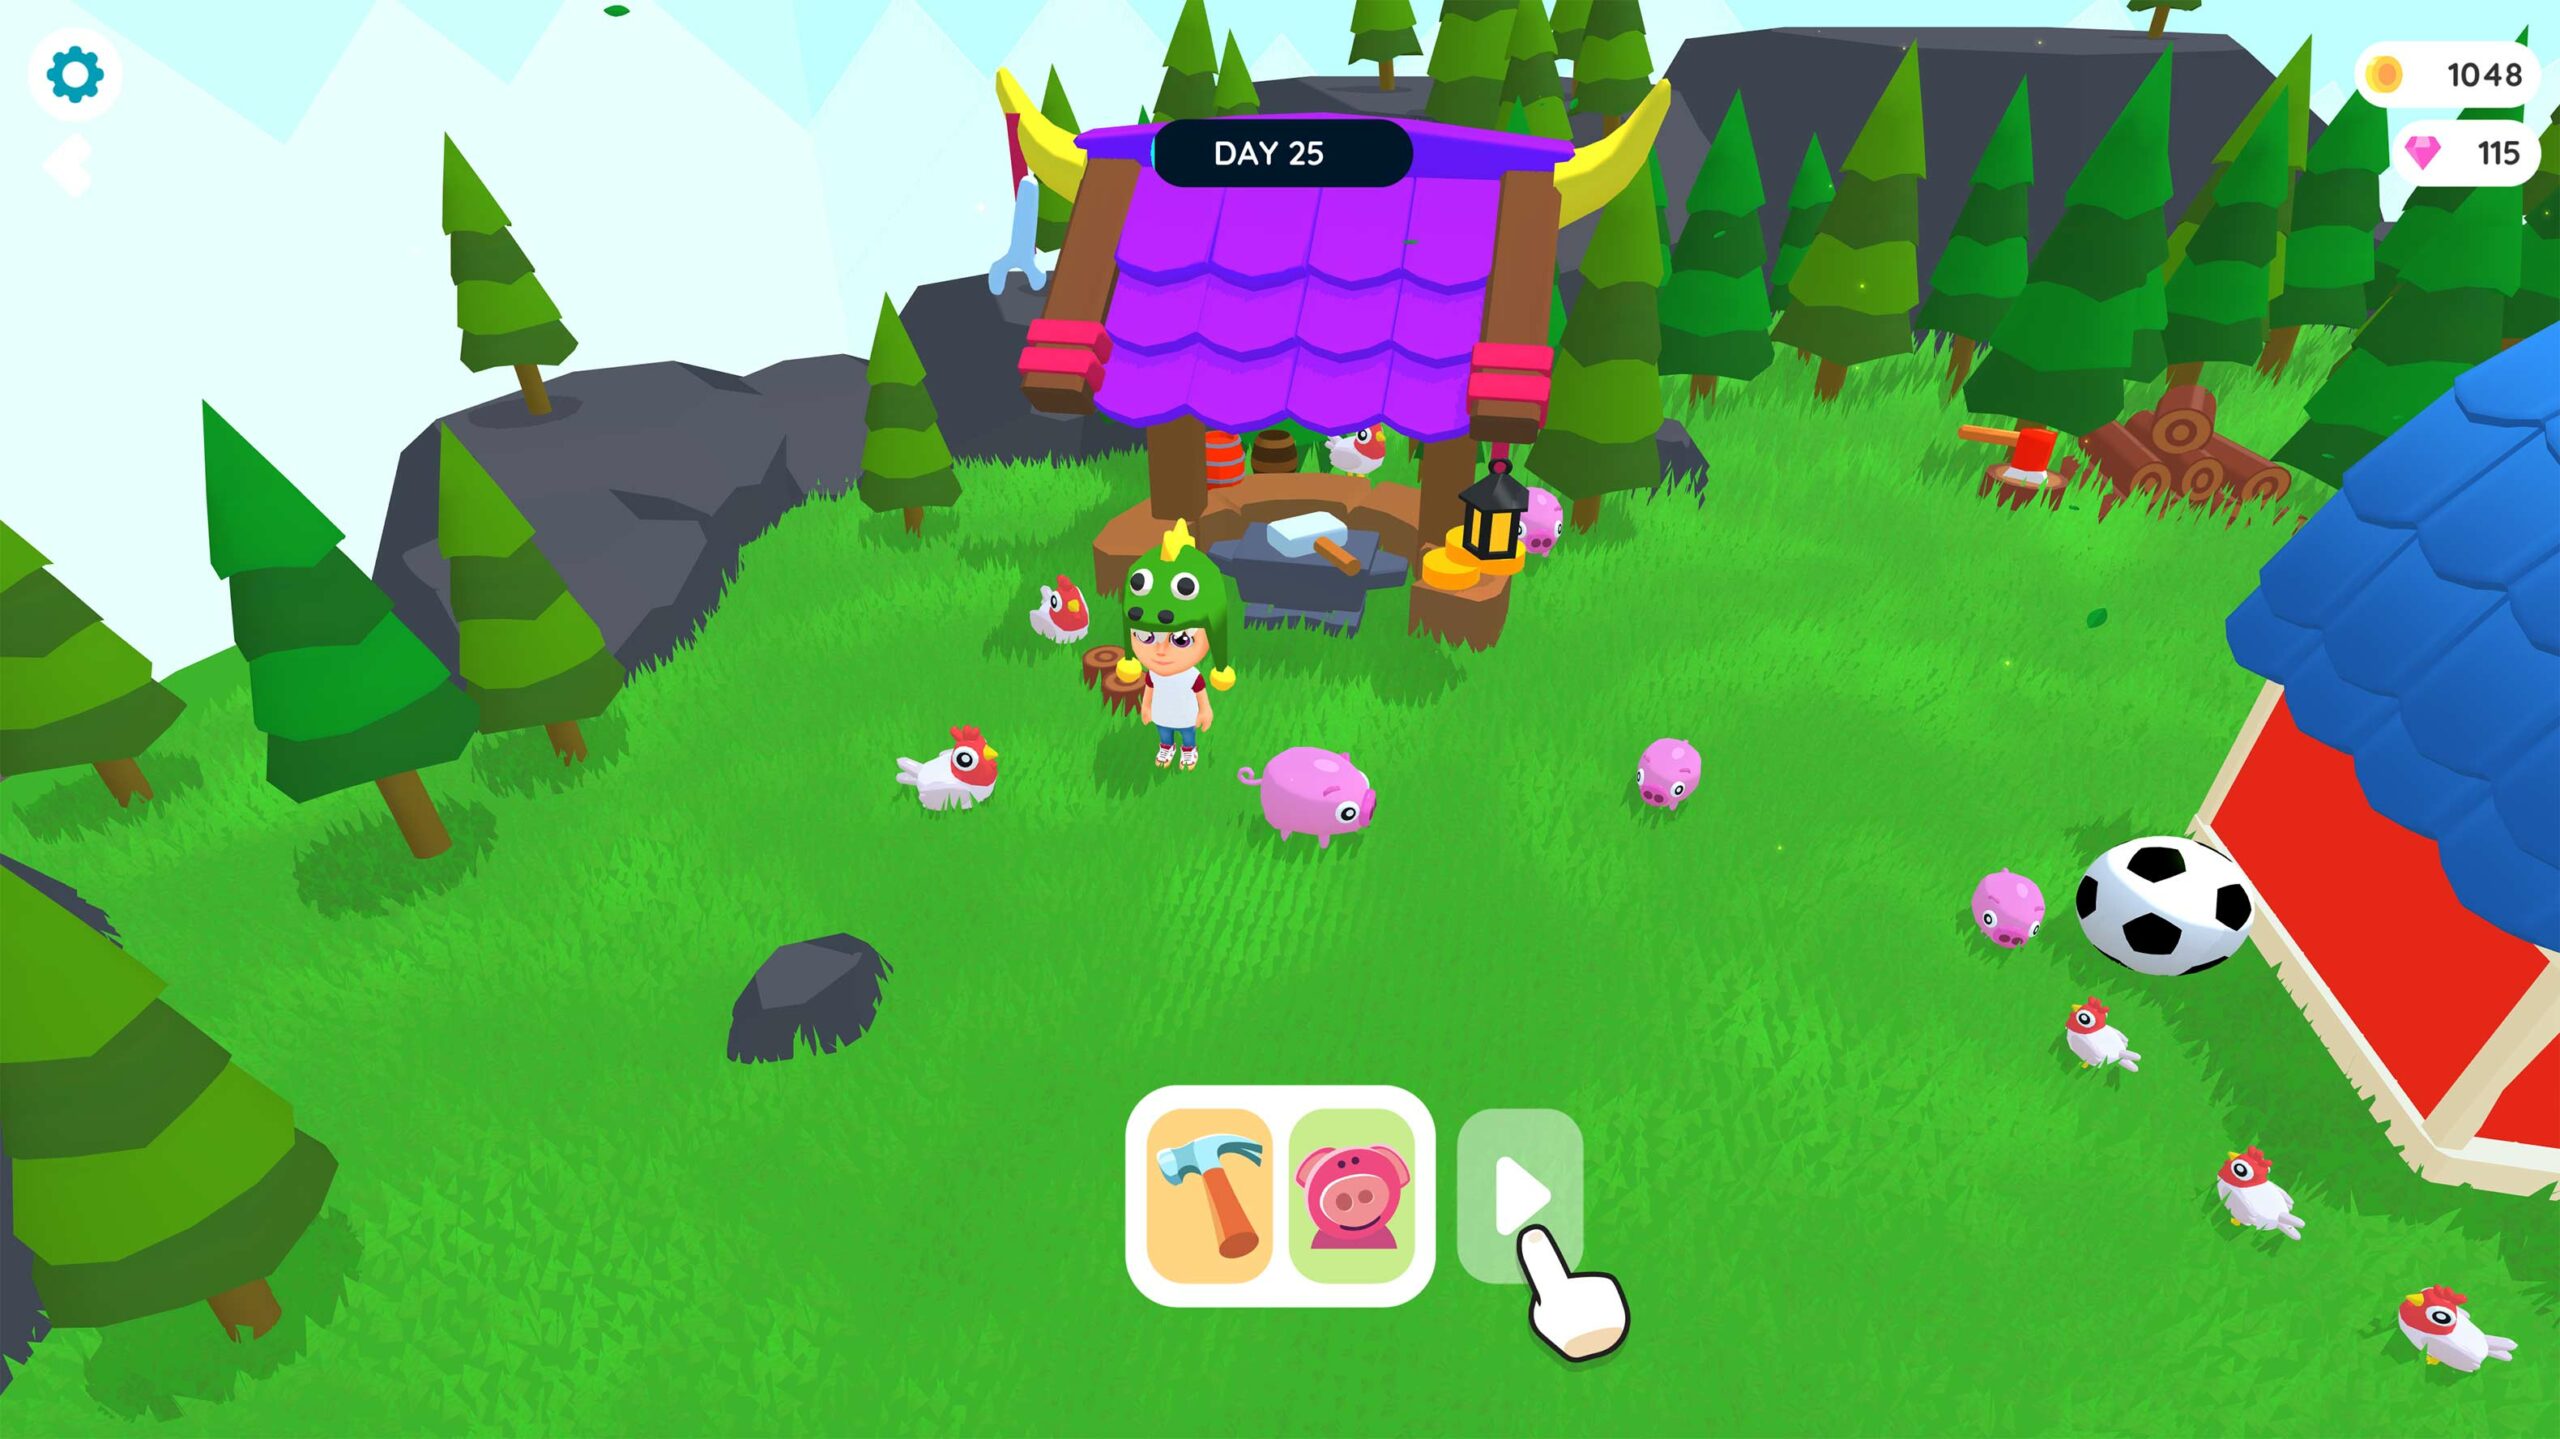 Apple reveals new Apple Arcade game ‘Farm It!,’ updates to two other titles